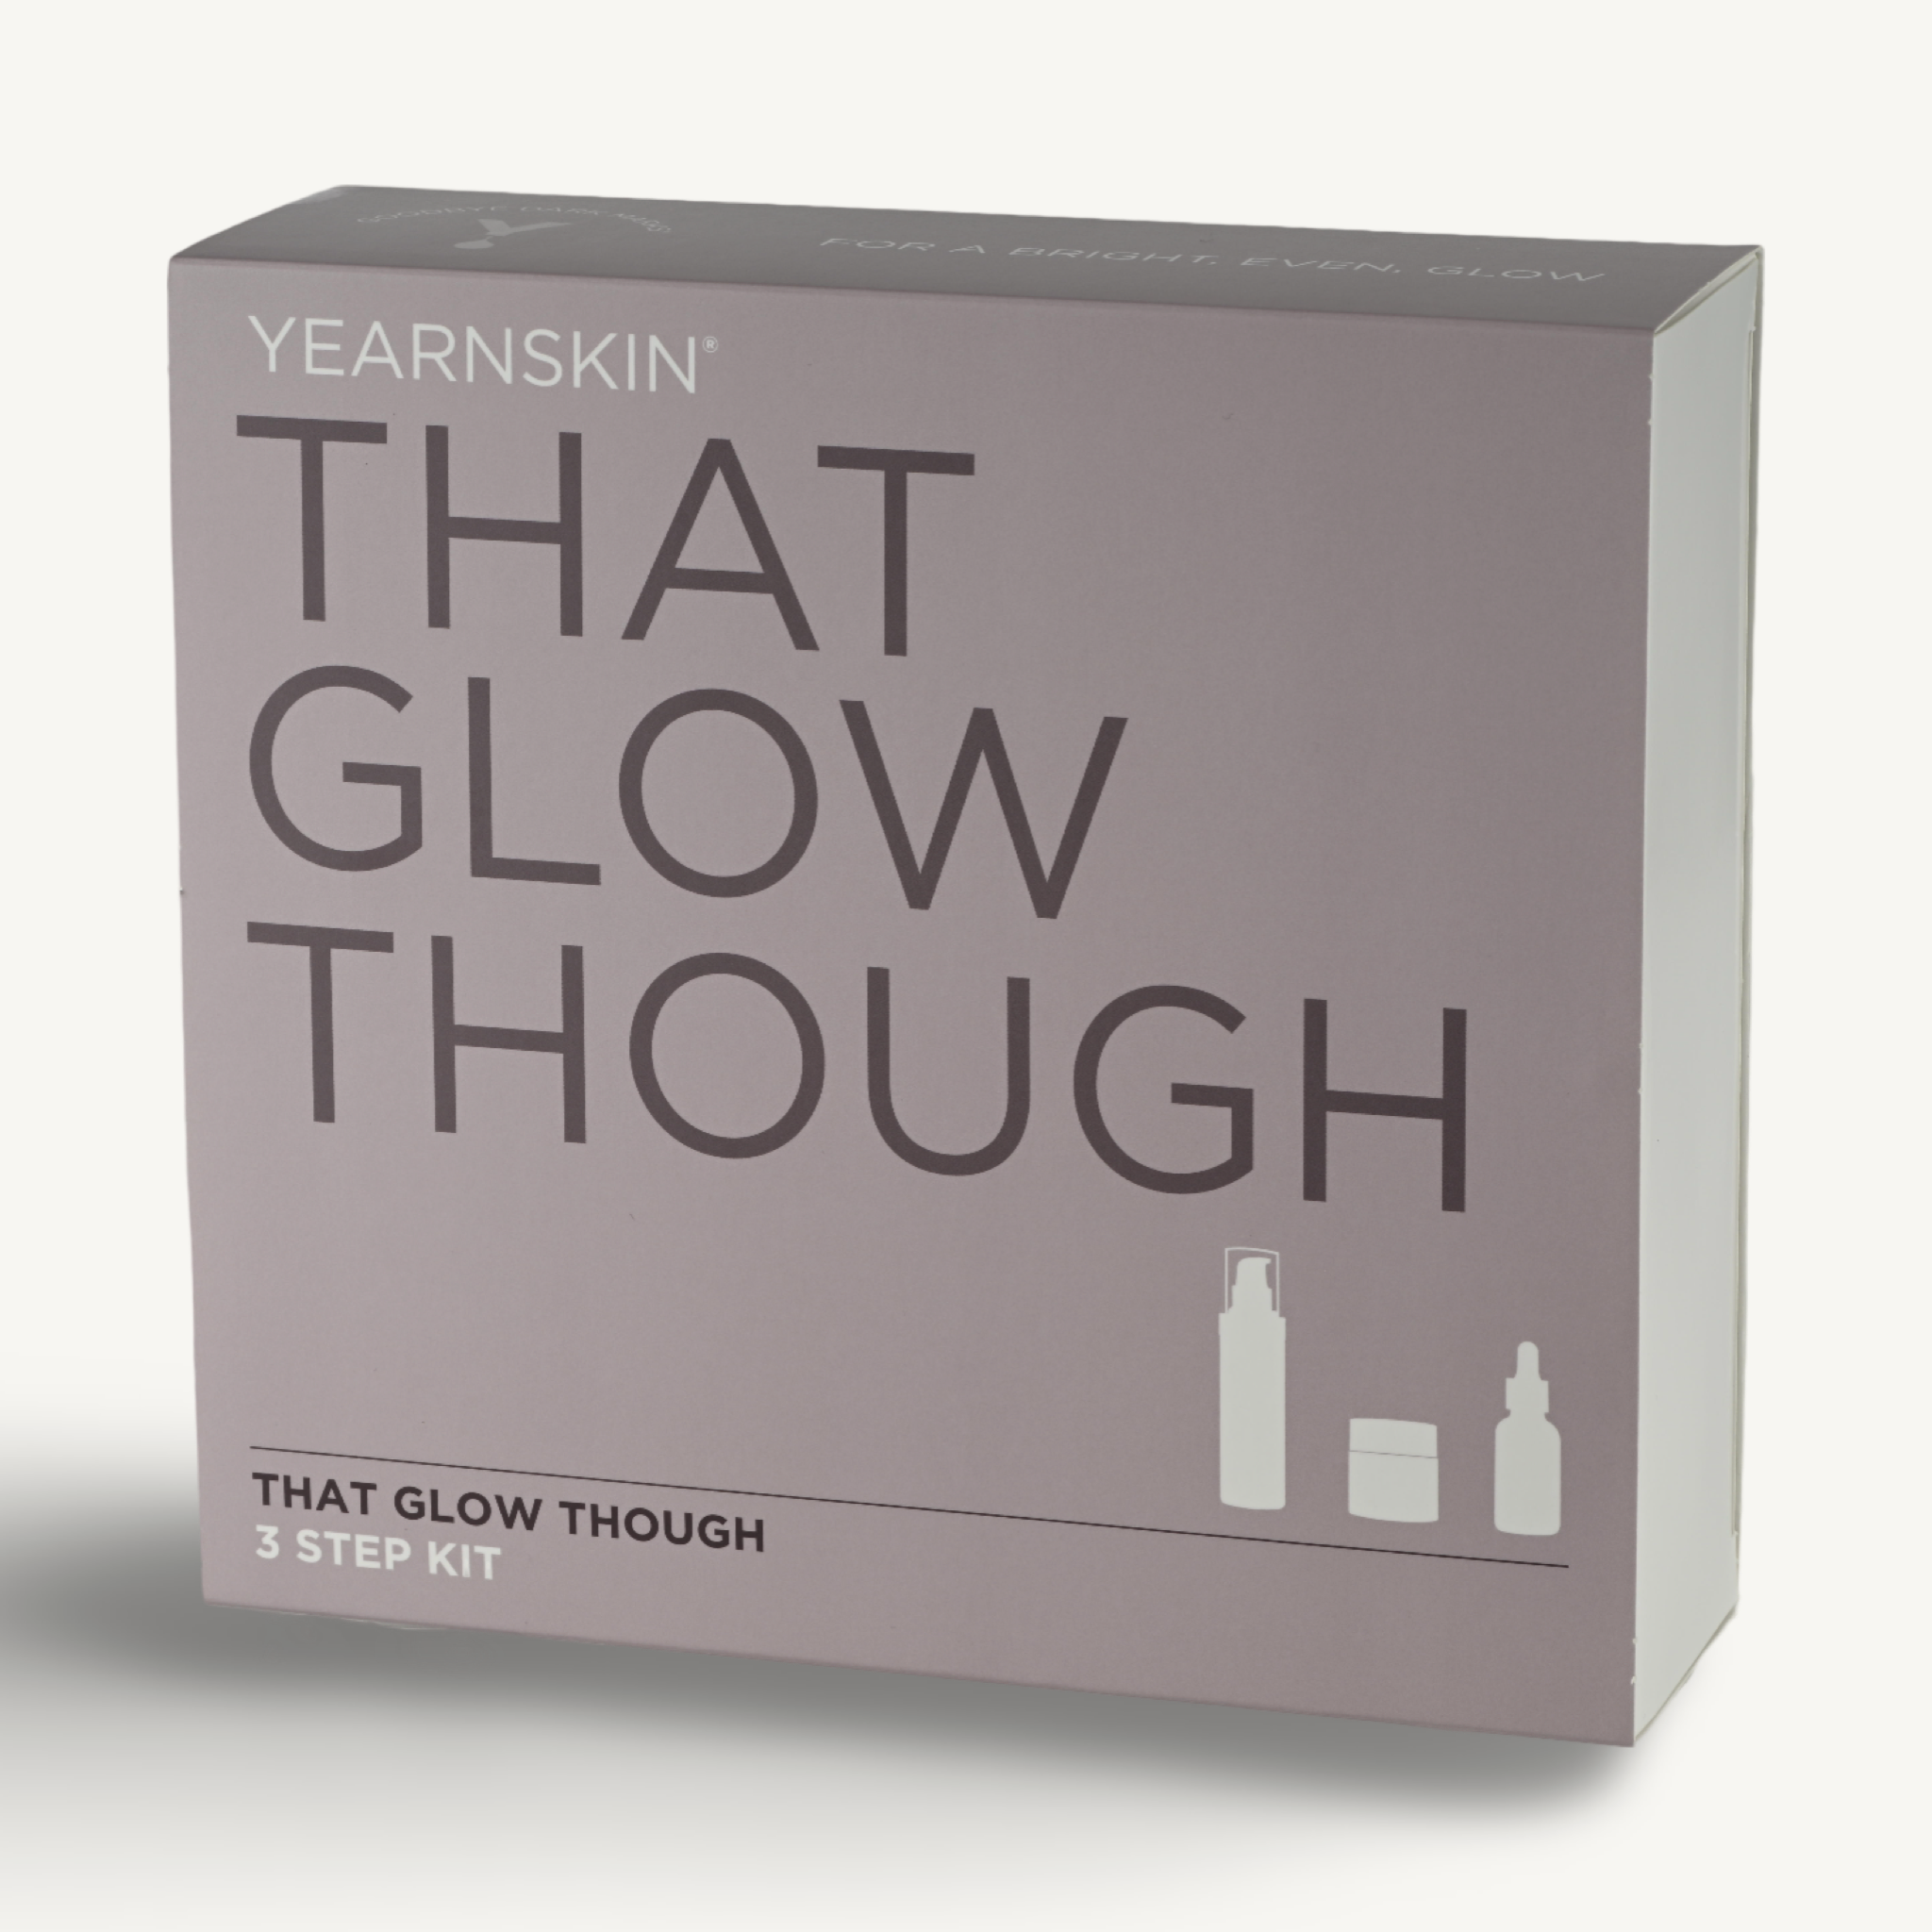 That Glow Though Kit - Brightens Complexion